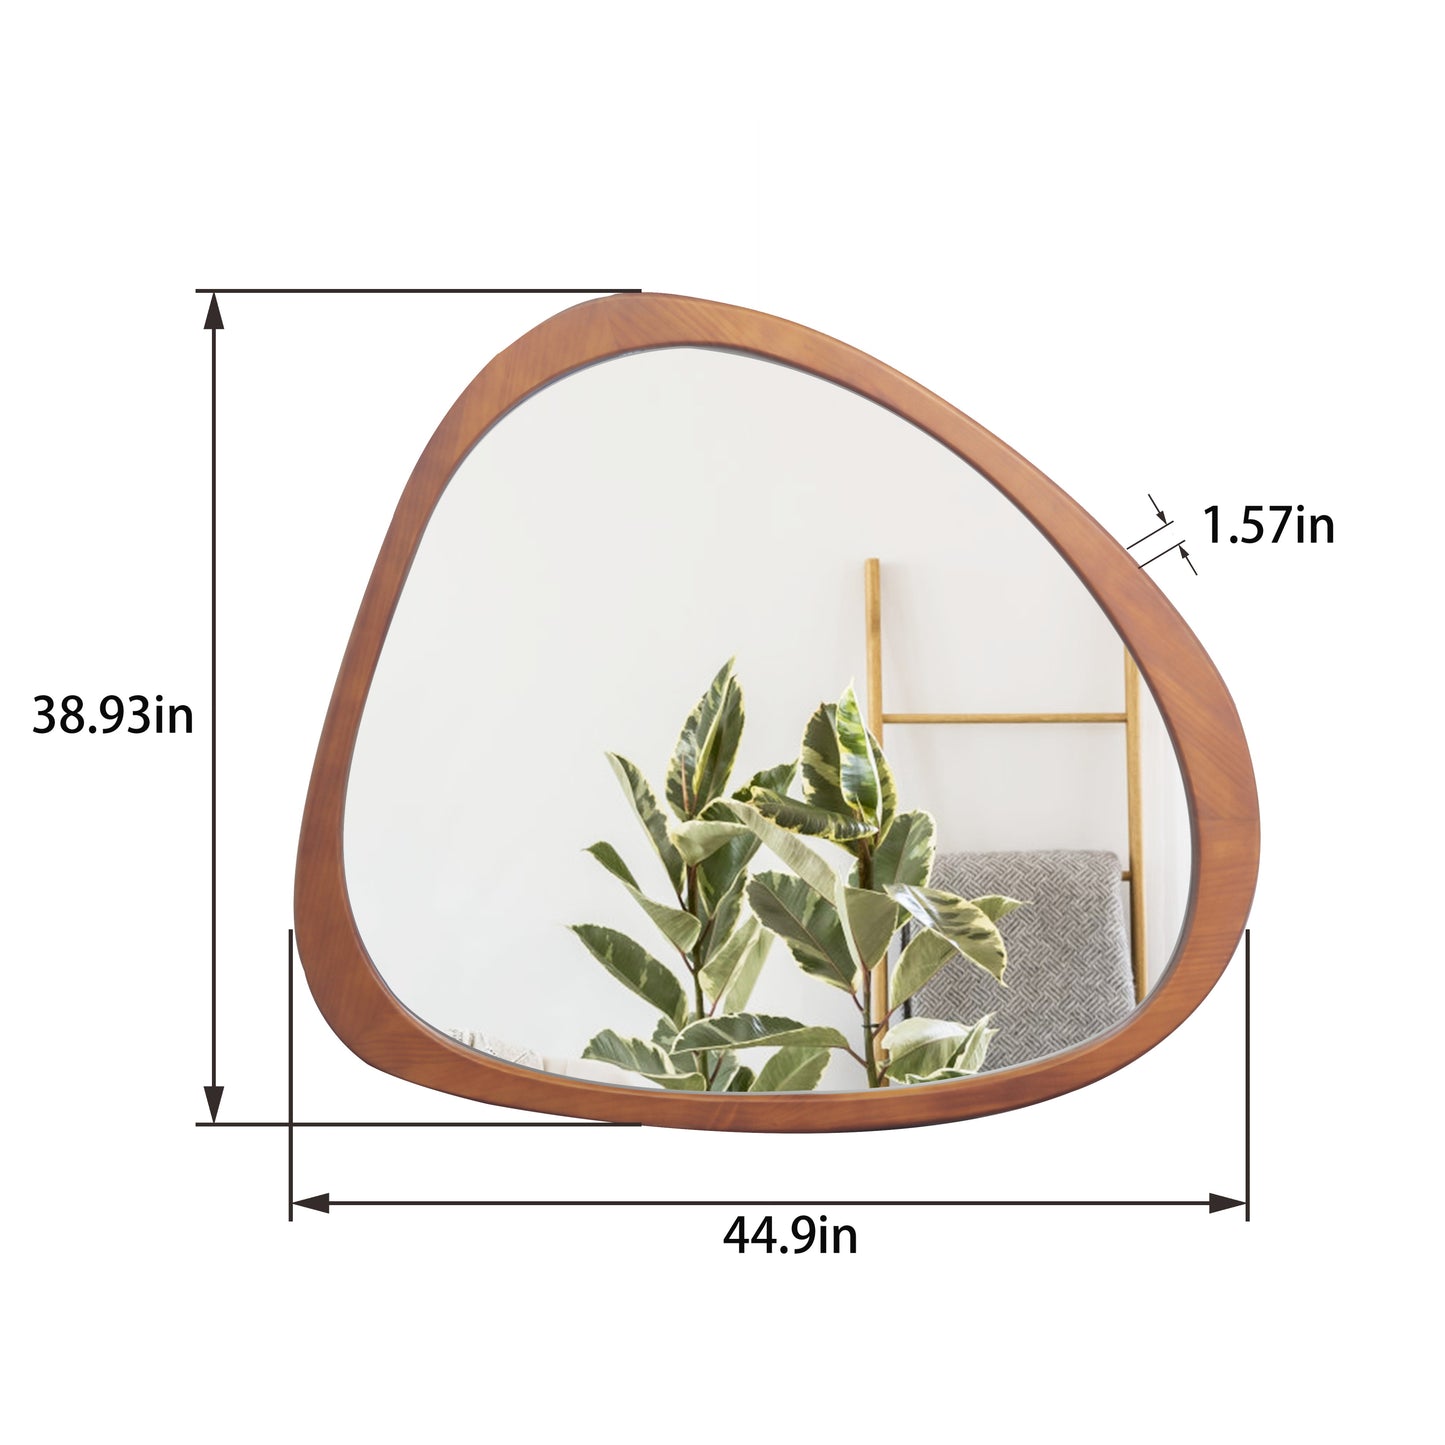 Solid Wood Mirror 45 Inch Asymmetrical Wall Mirror Wooden Framed Mirror Large Sized Dressing Mirror, for Living Room, Bedroom, Bathroom, Hallway or Entry Way